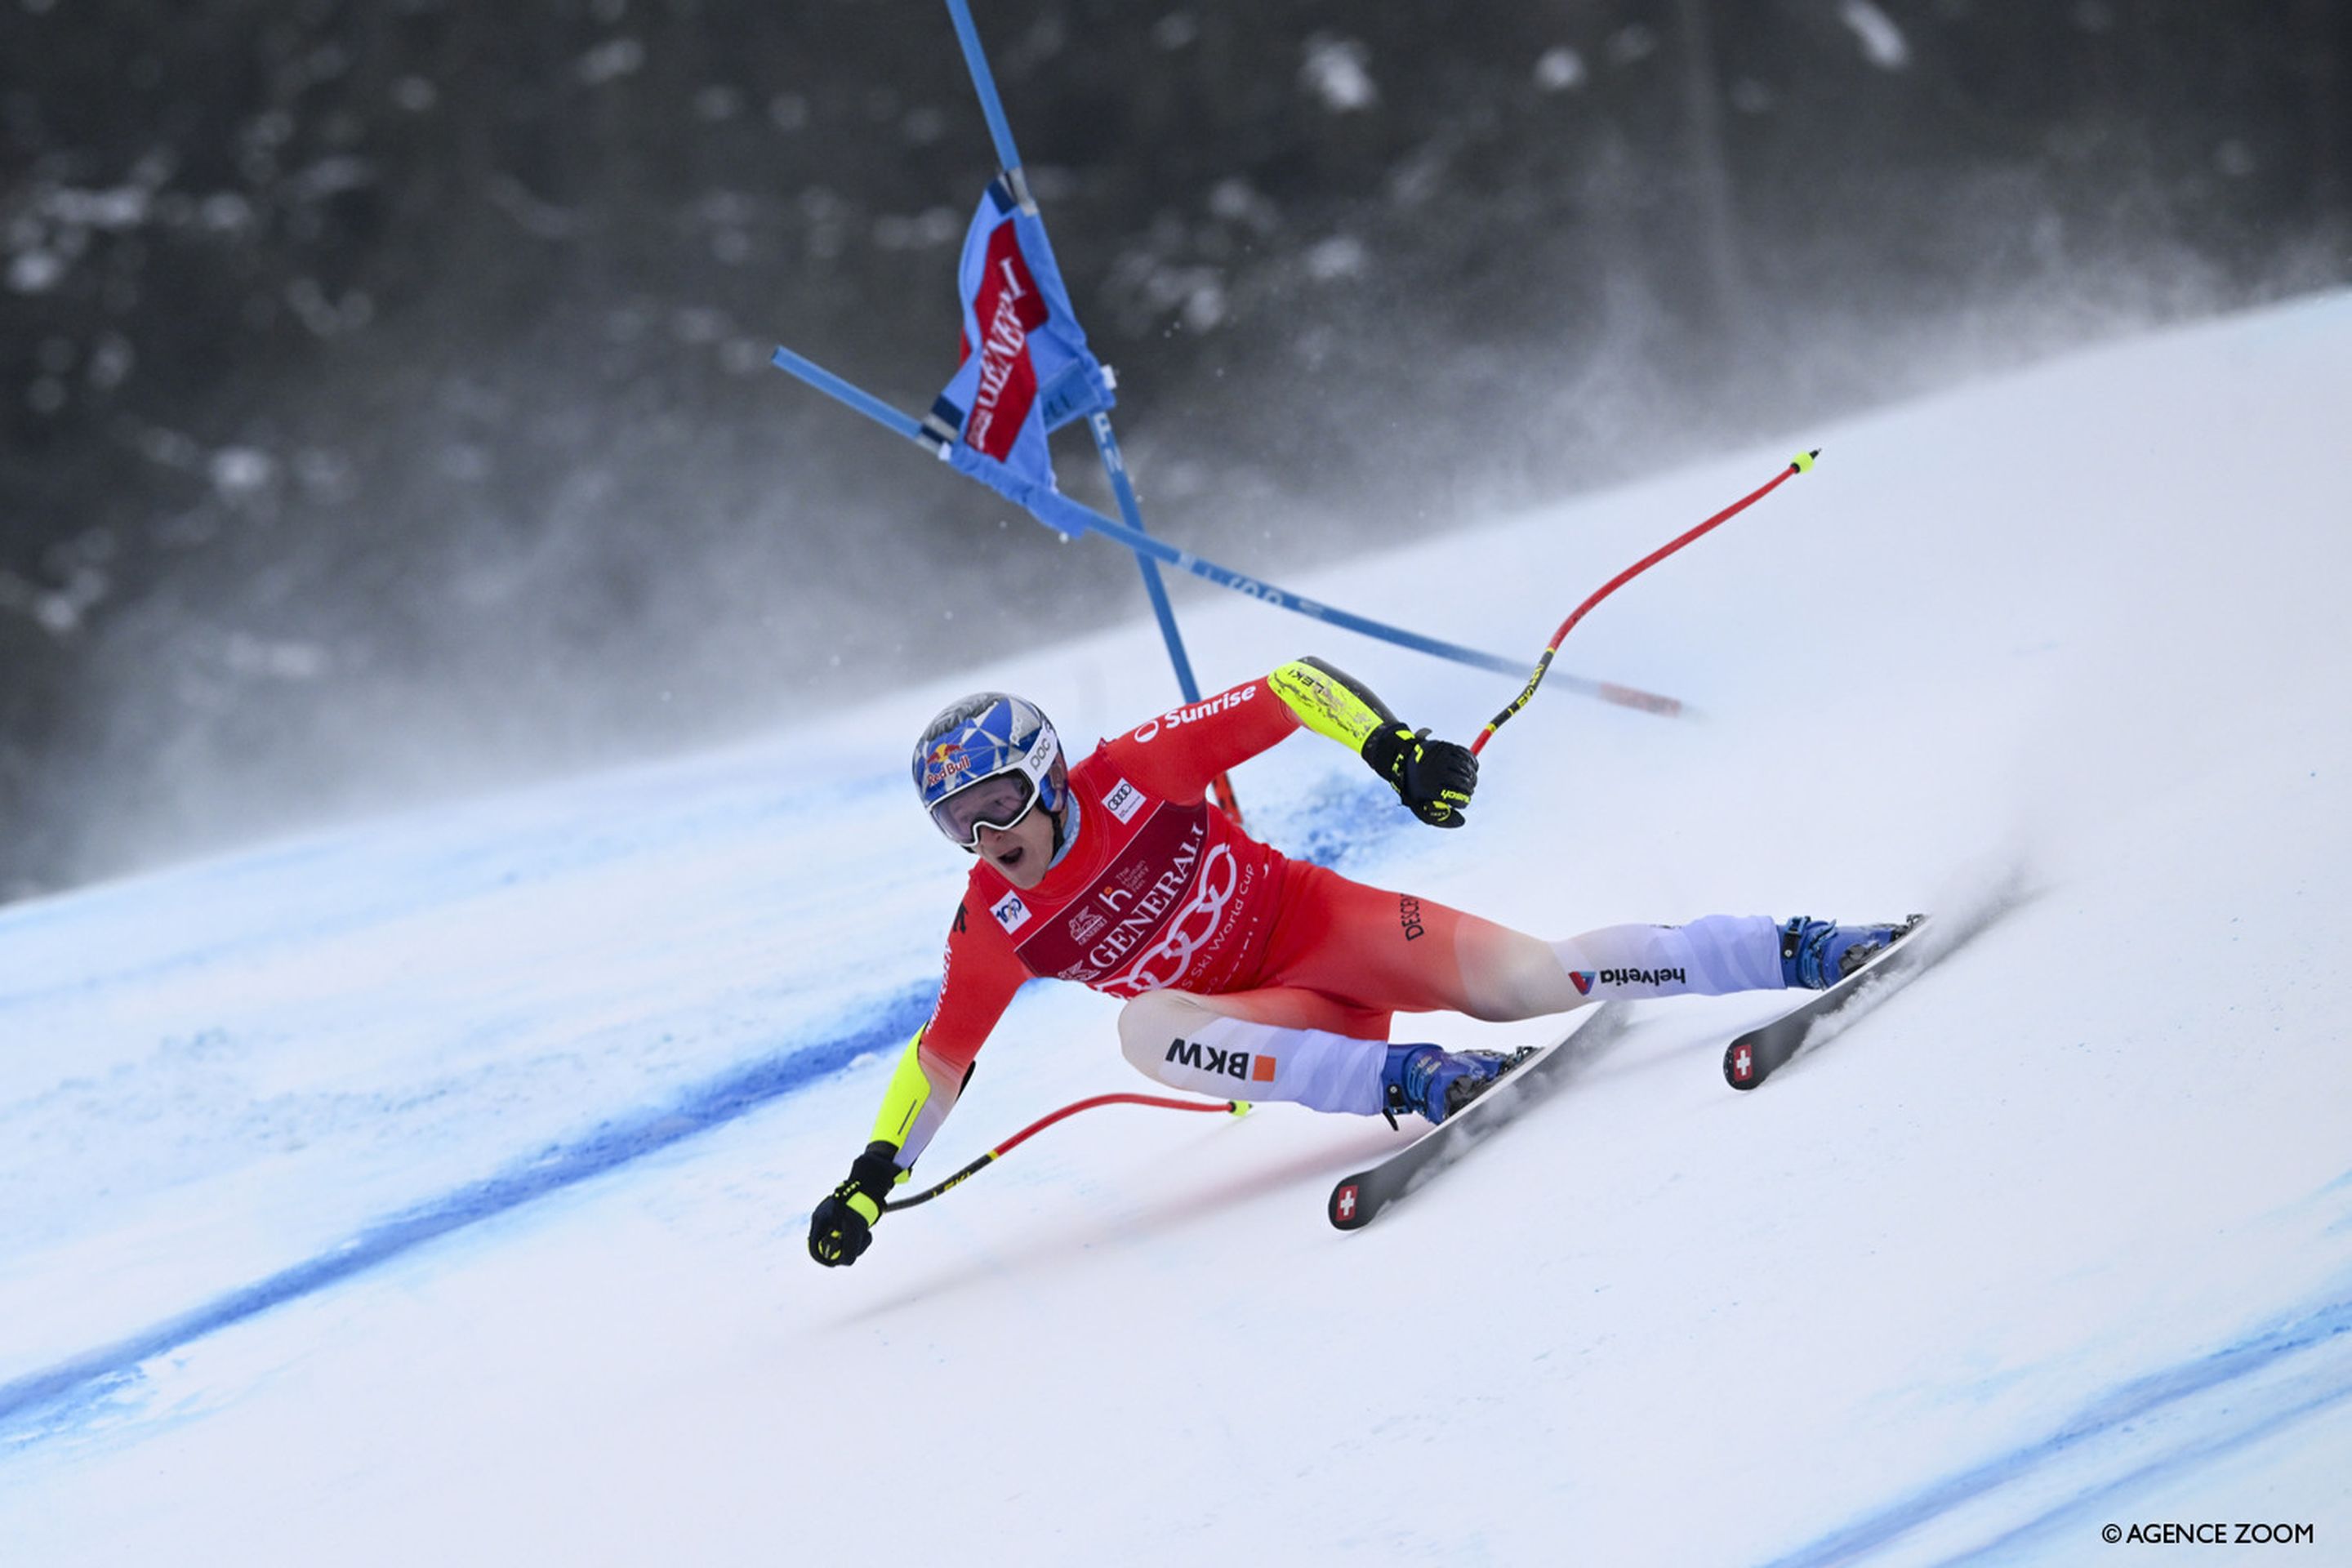 Odermatt finished joint third, his best result at Kvitfjell (Agence Zoom)